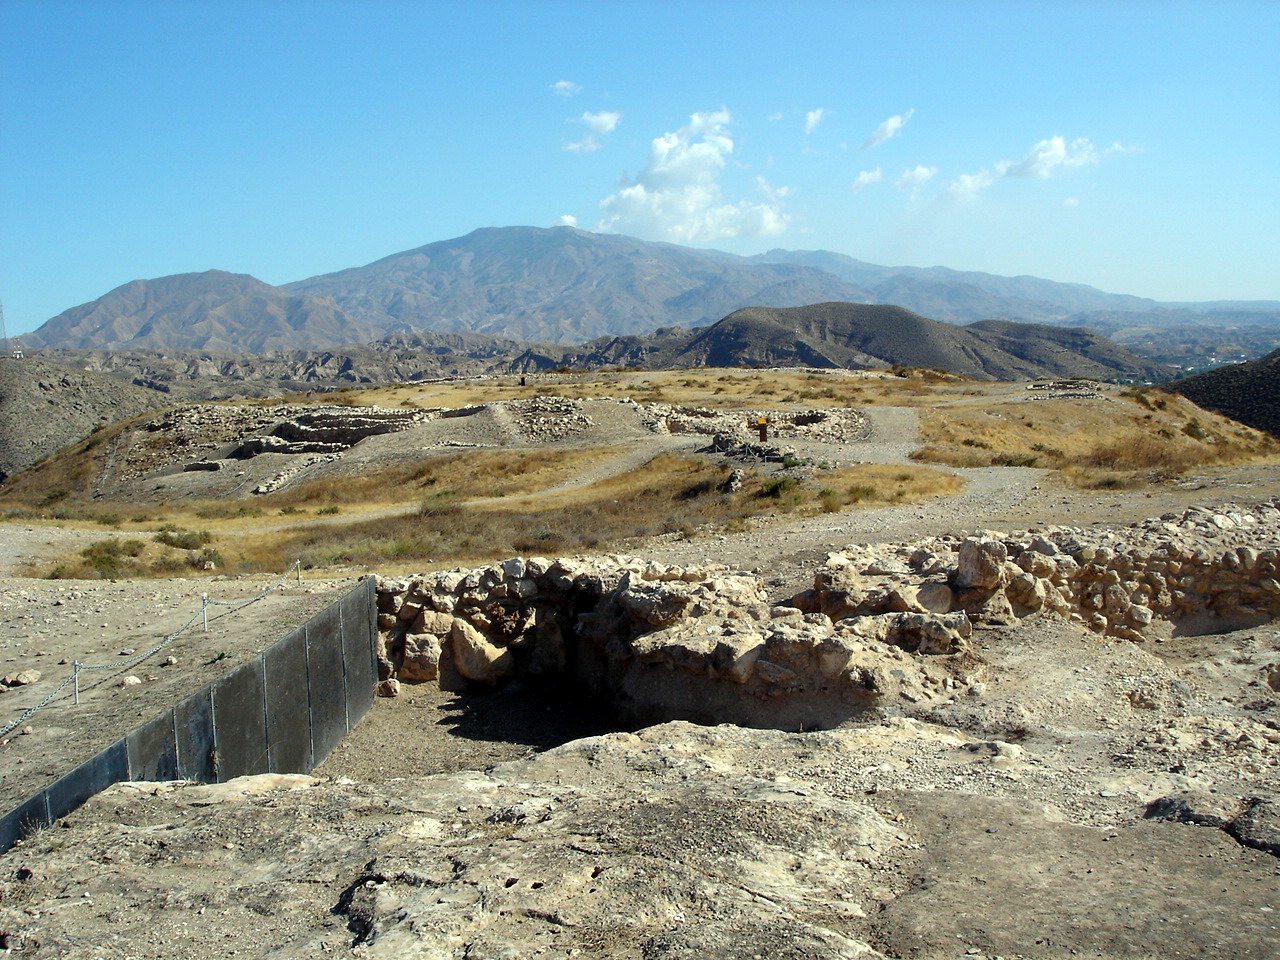 View looking towards the oldest settlement